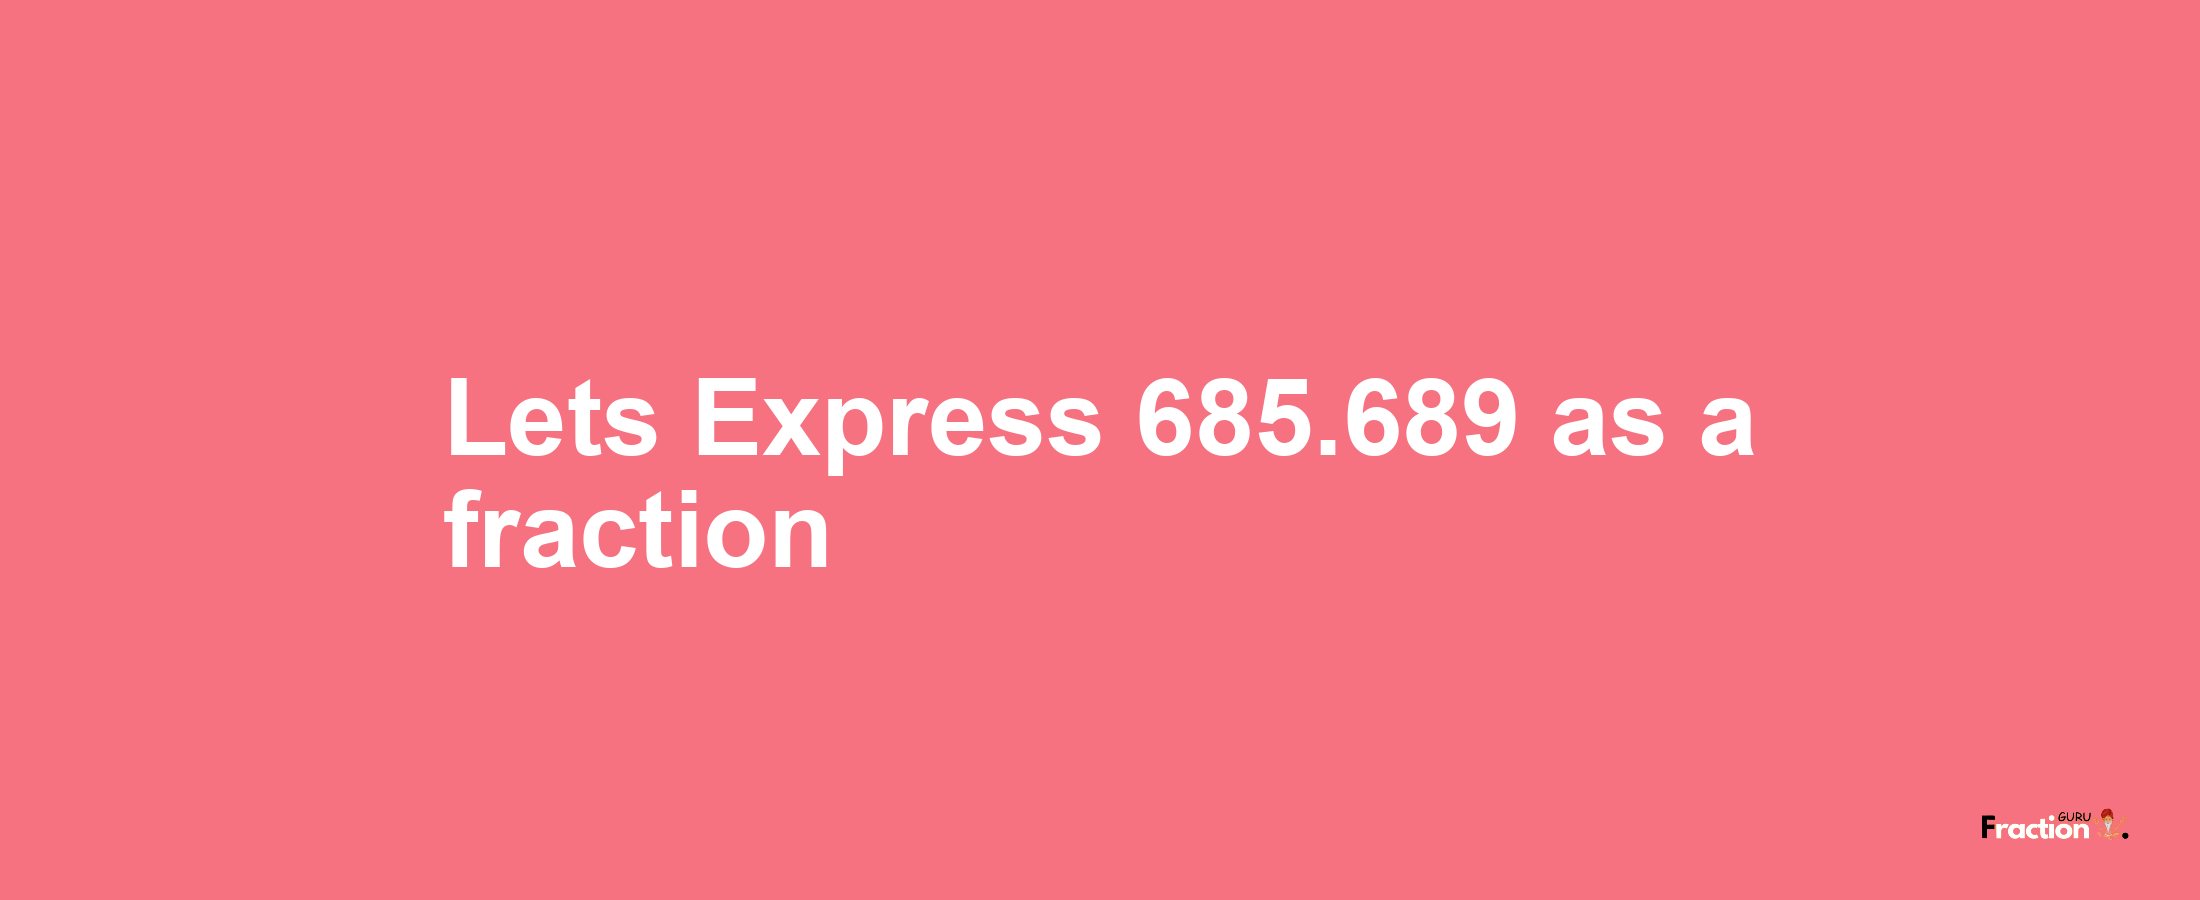 Lets Express 685.689 as afraction